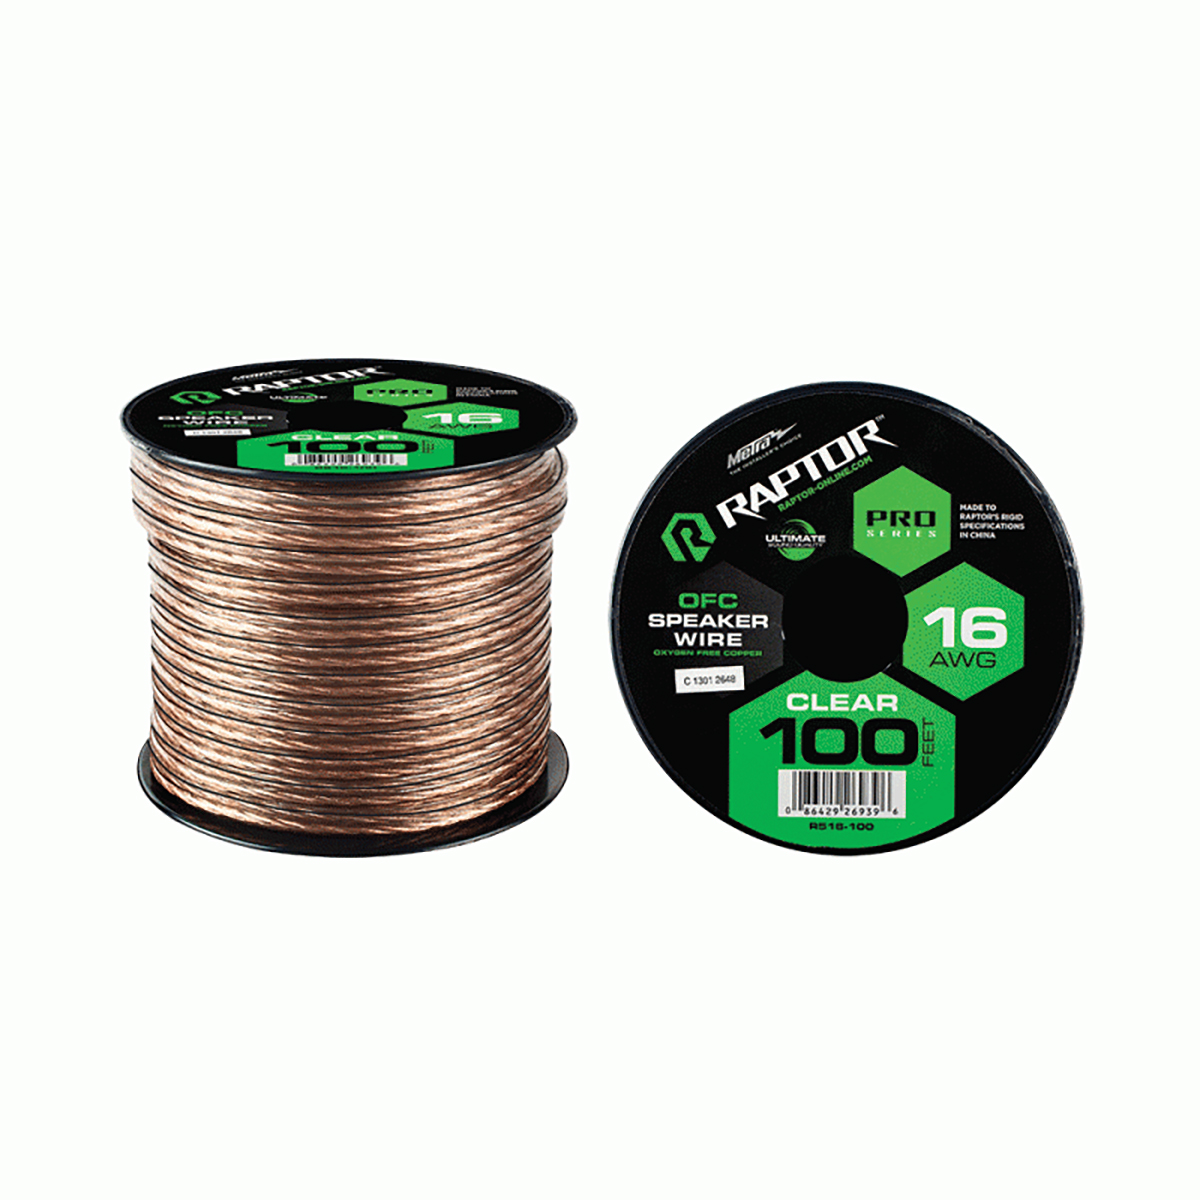 100 FT 16 AWG PROSERIES OFC SPEAKER WIRE